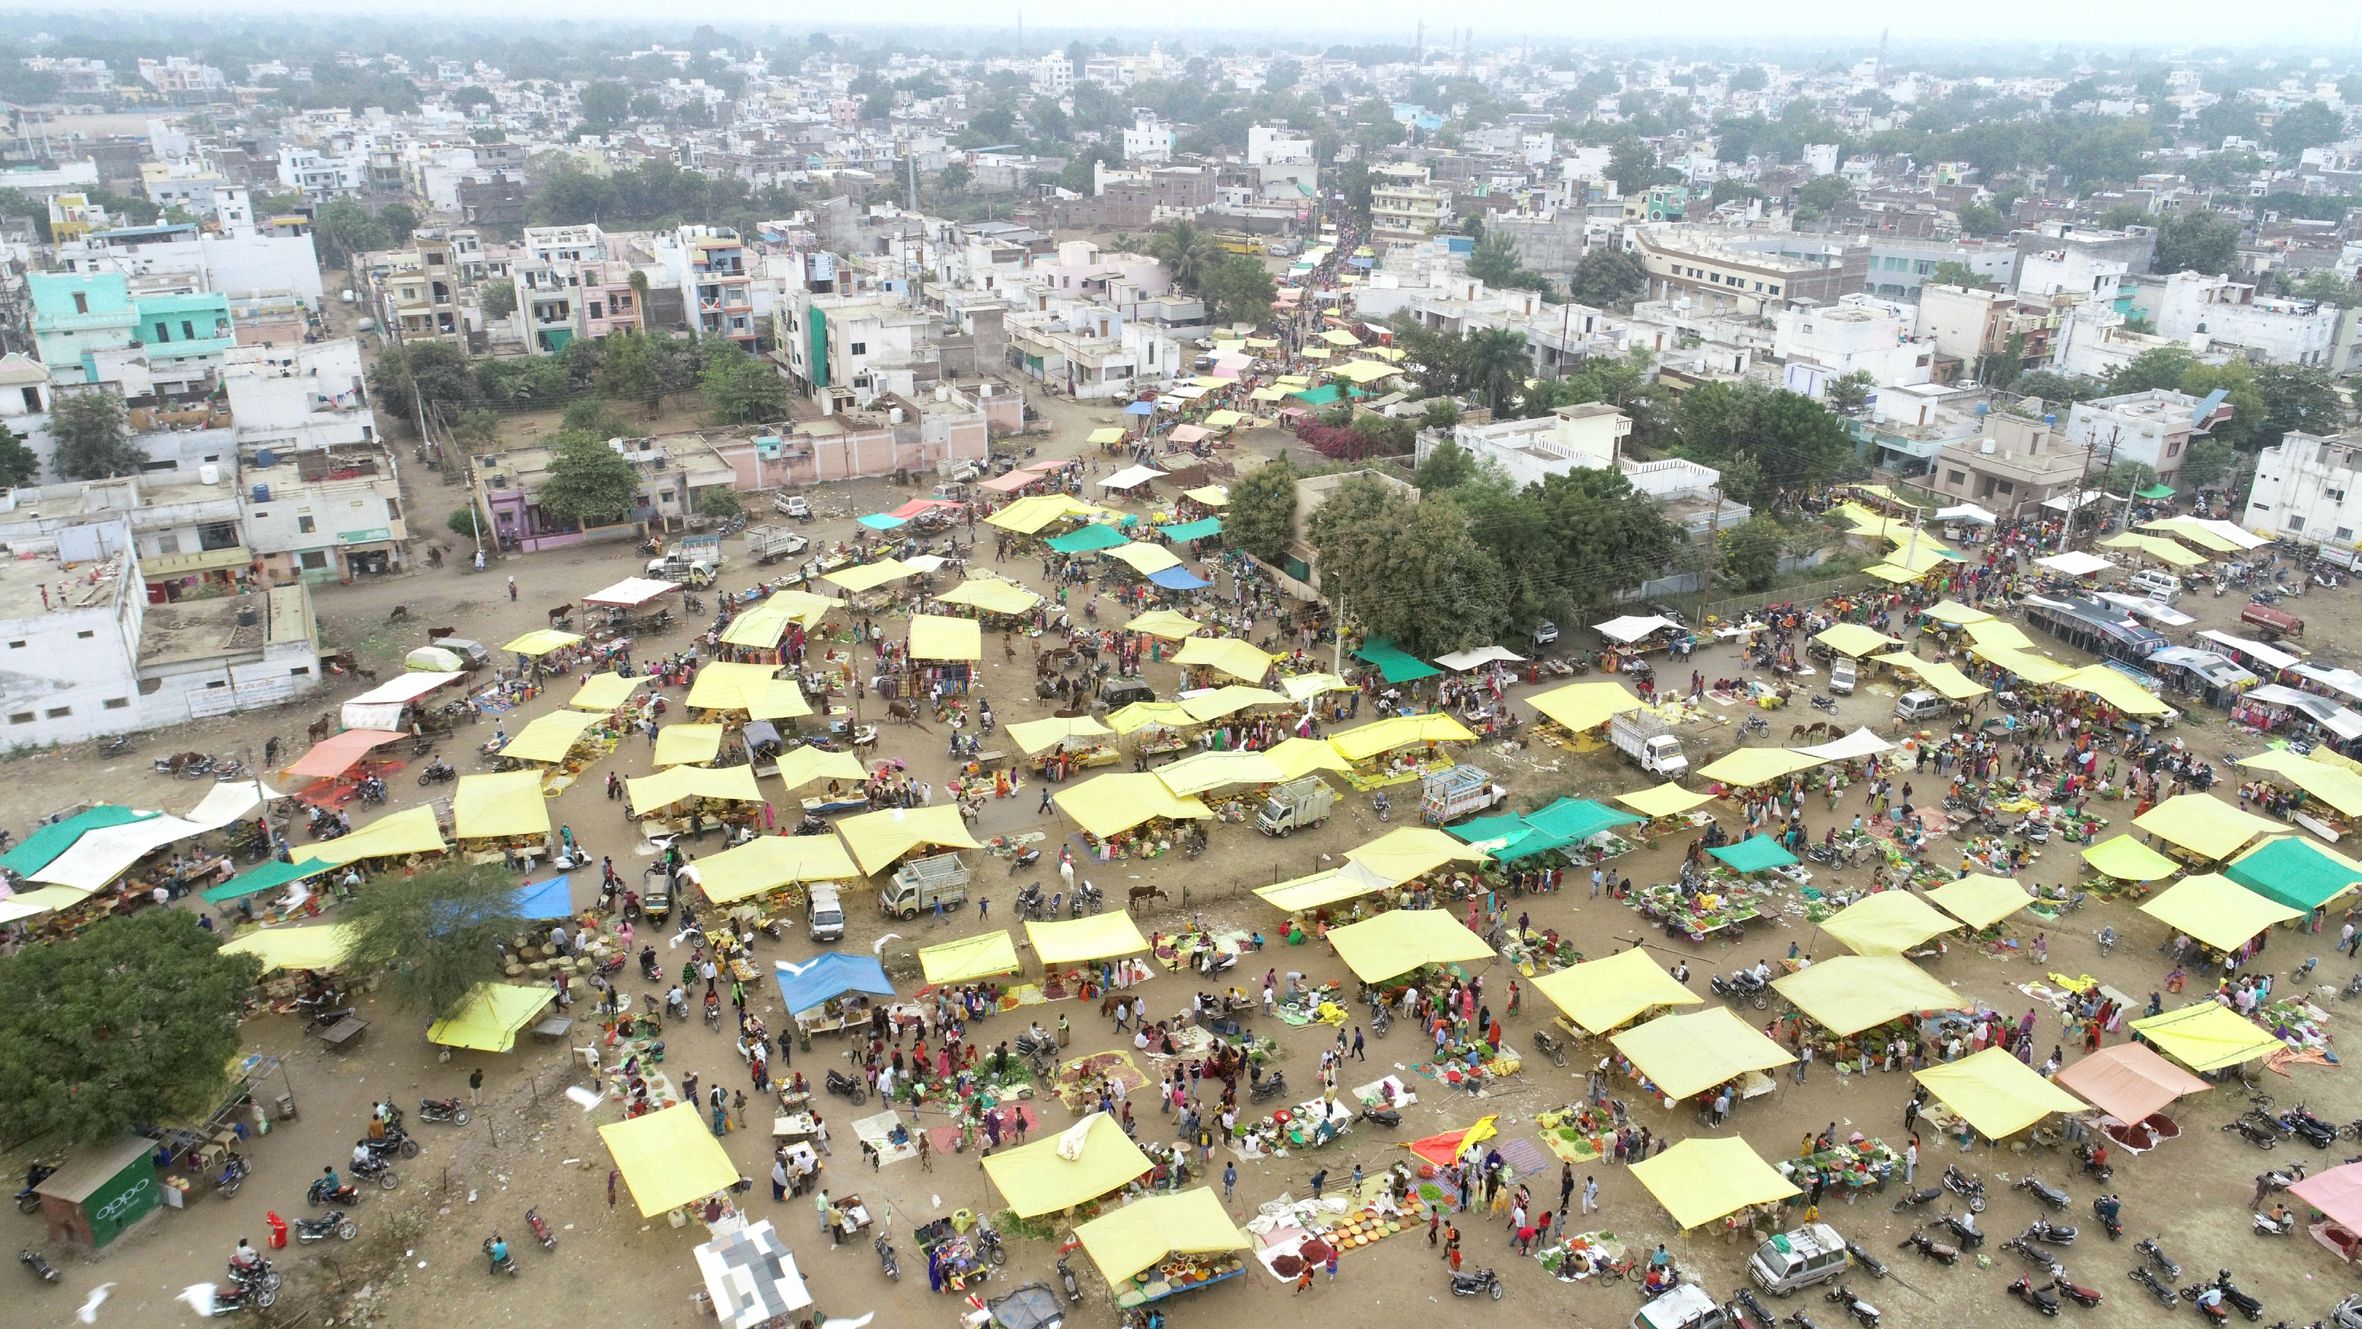 There is less space for market in Barwani